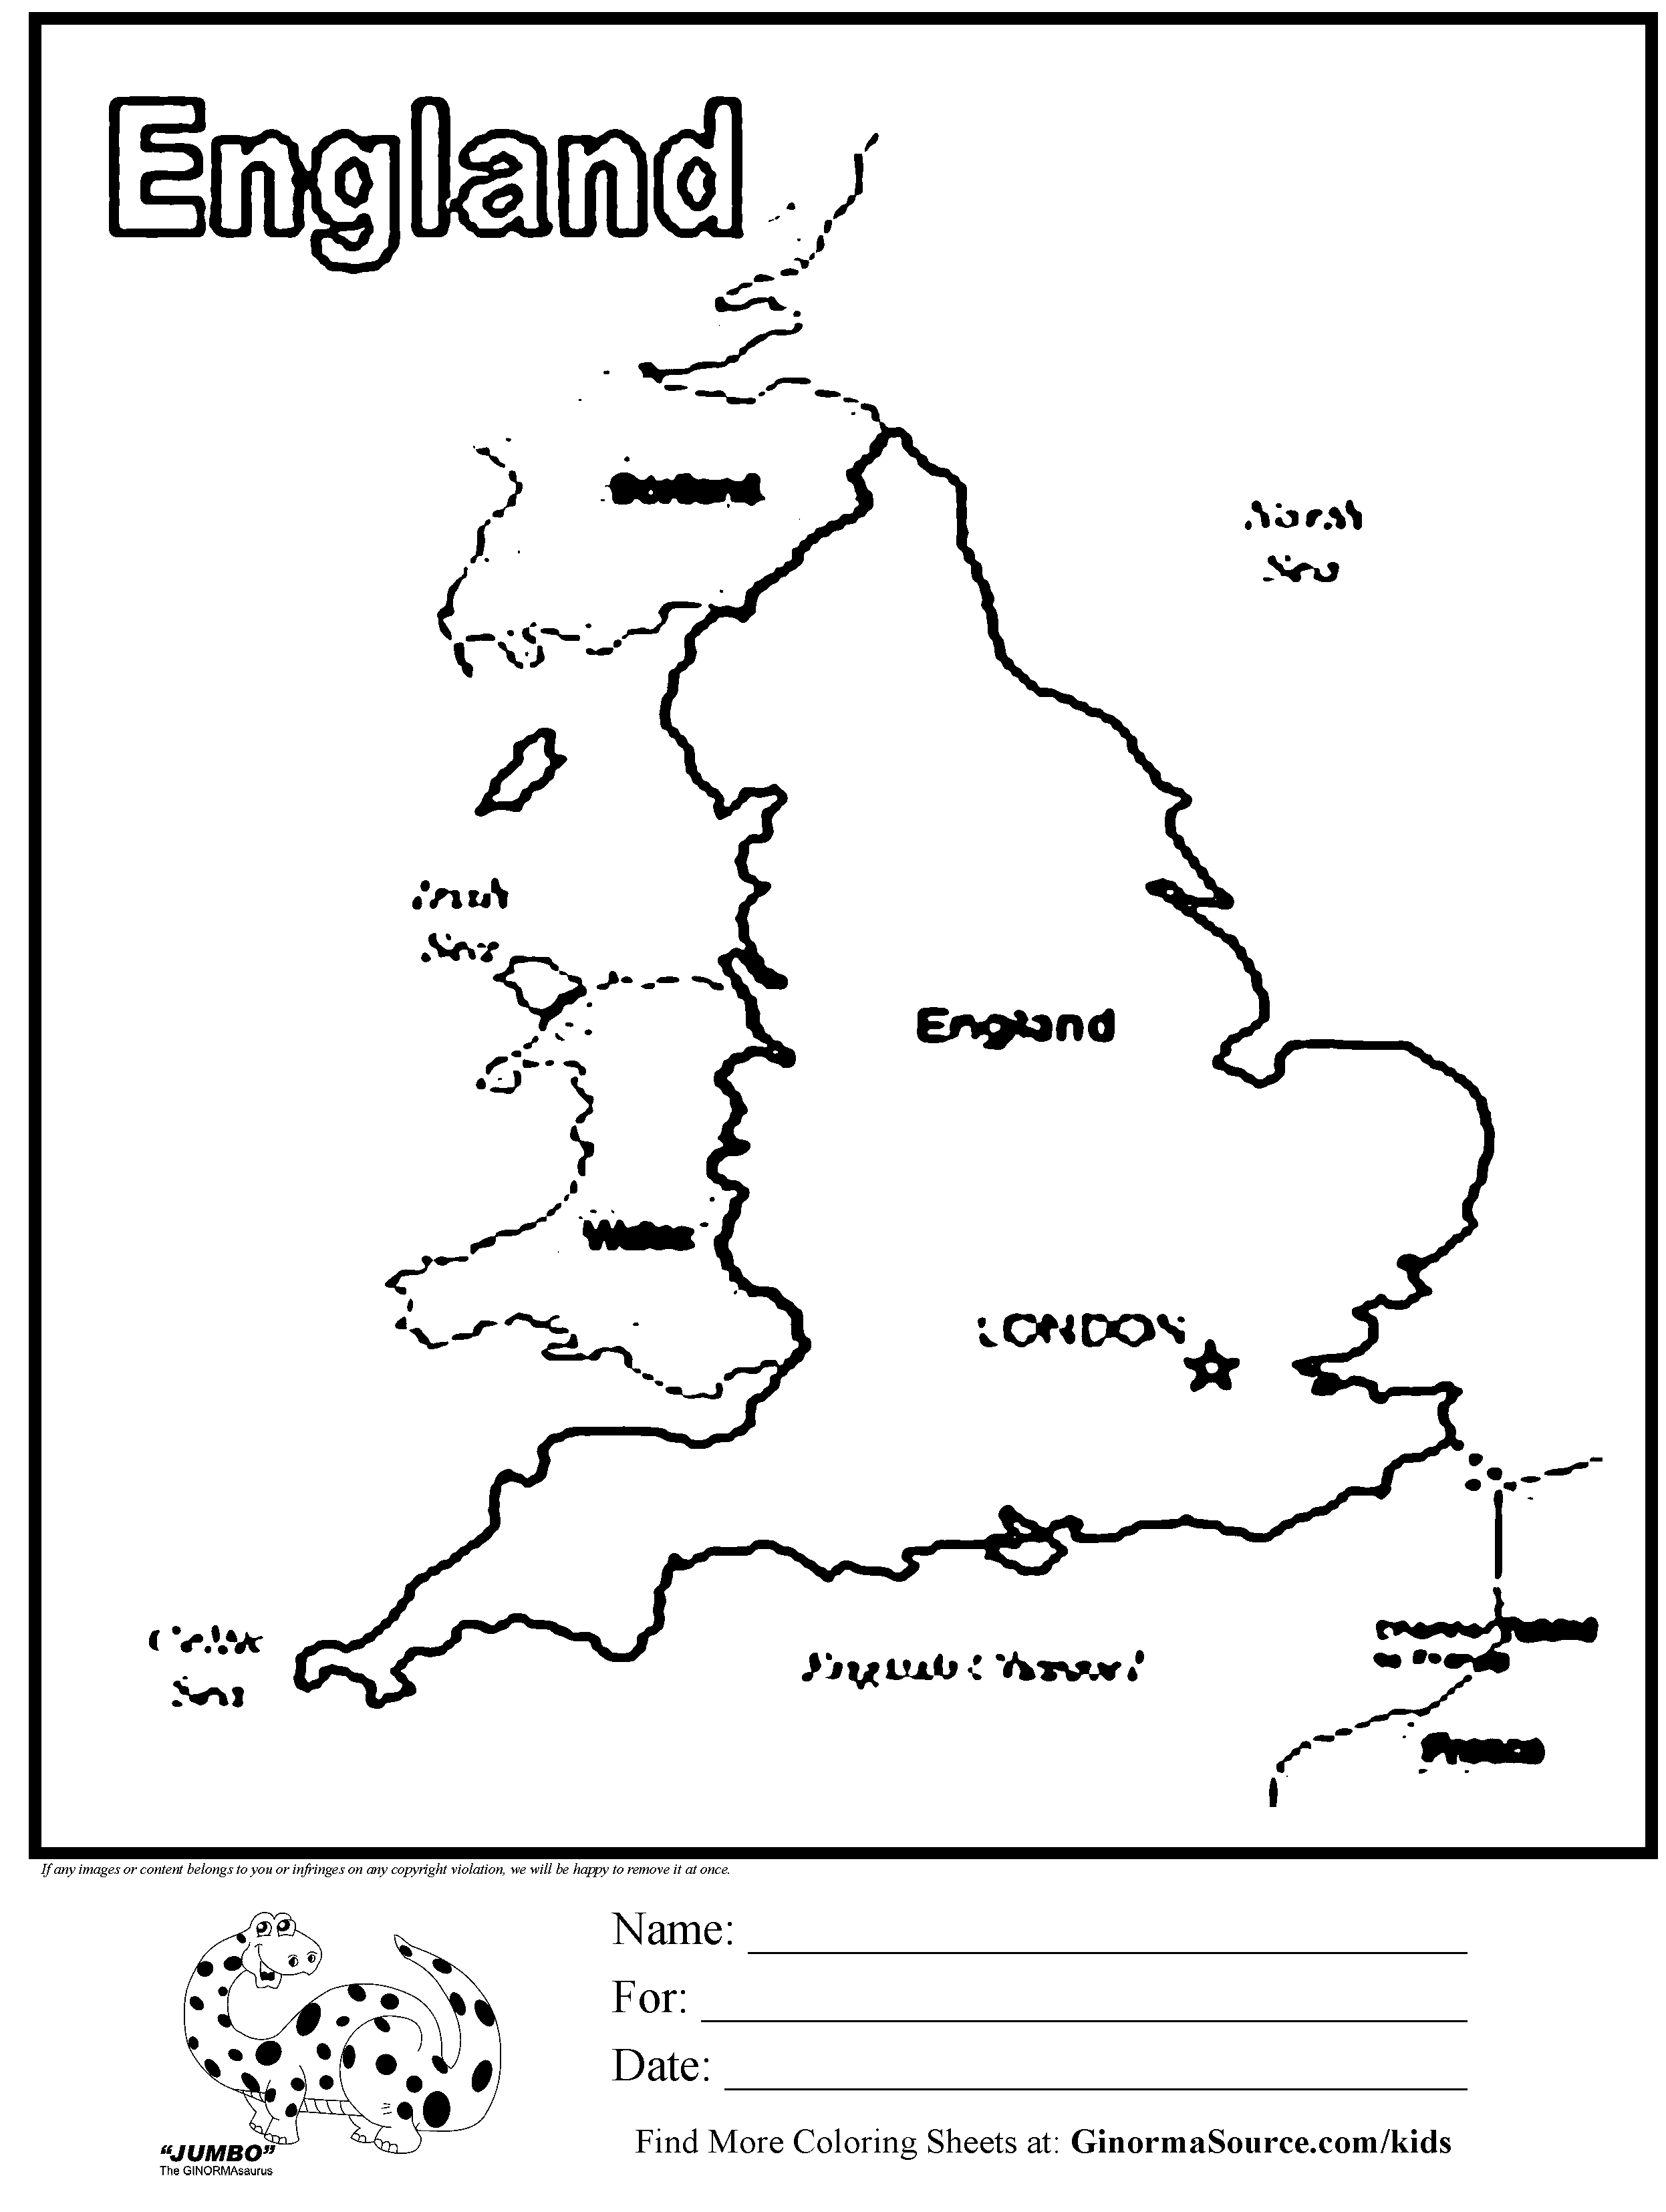 United Kingdom Map Coloring Pages - High Quality Coloring Pages